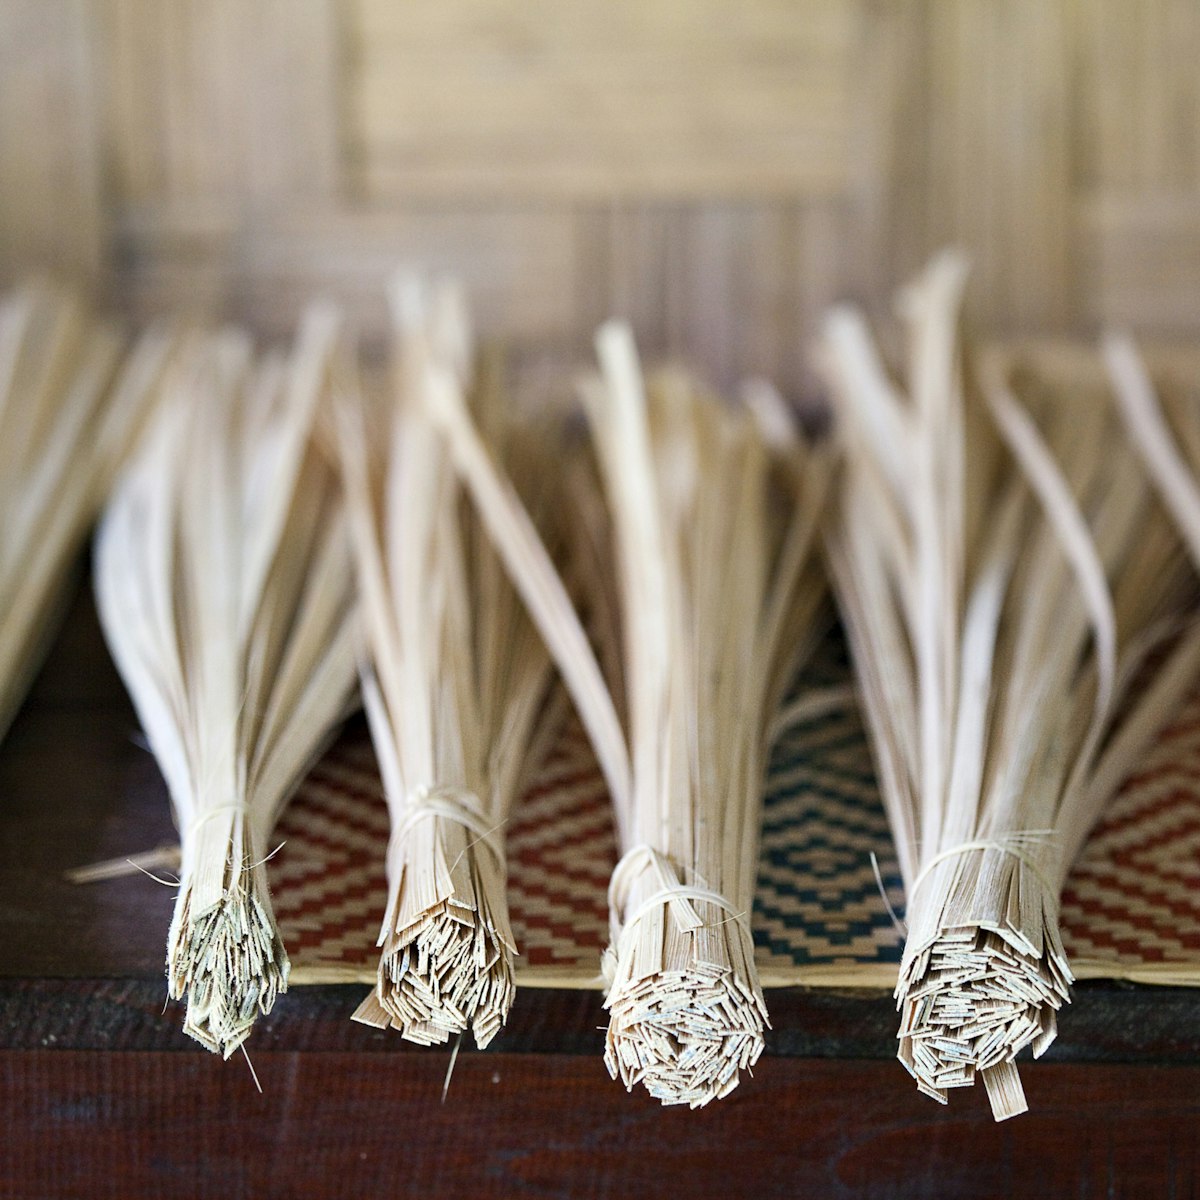 Close-up of bamboo sticks used for weaving at Ock Pop Tok Living Craft Centre, Ban Saylom.